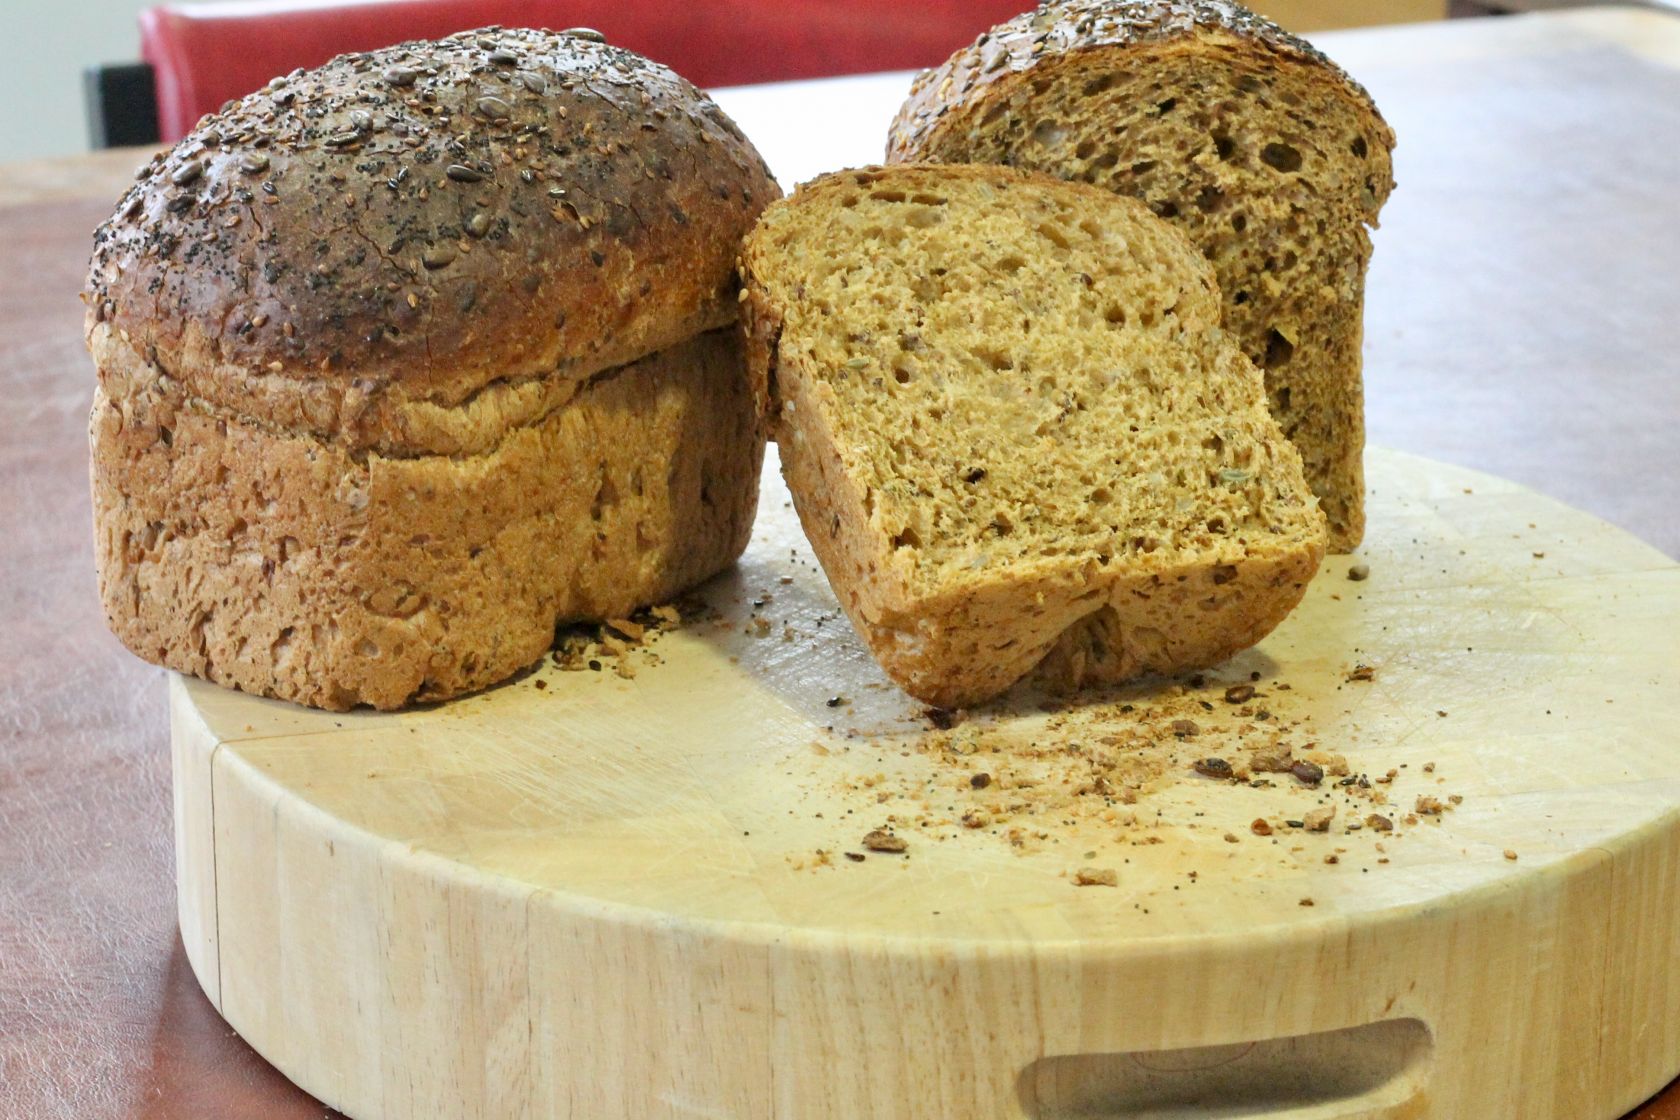 Video: Launching our new High Fibre Multi Seed Loaf